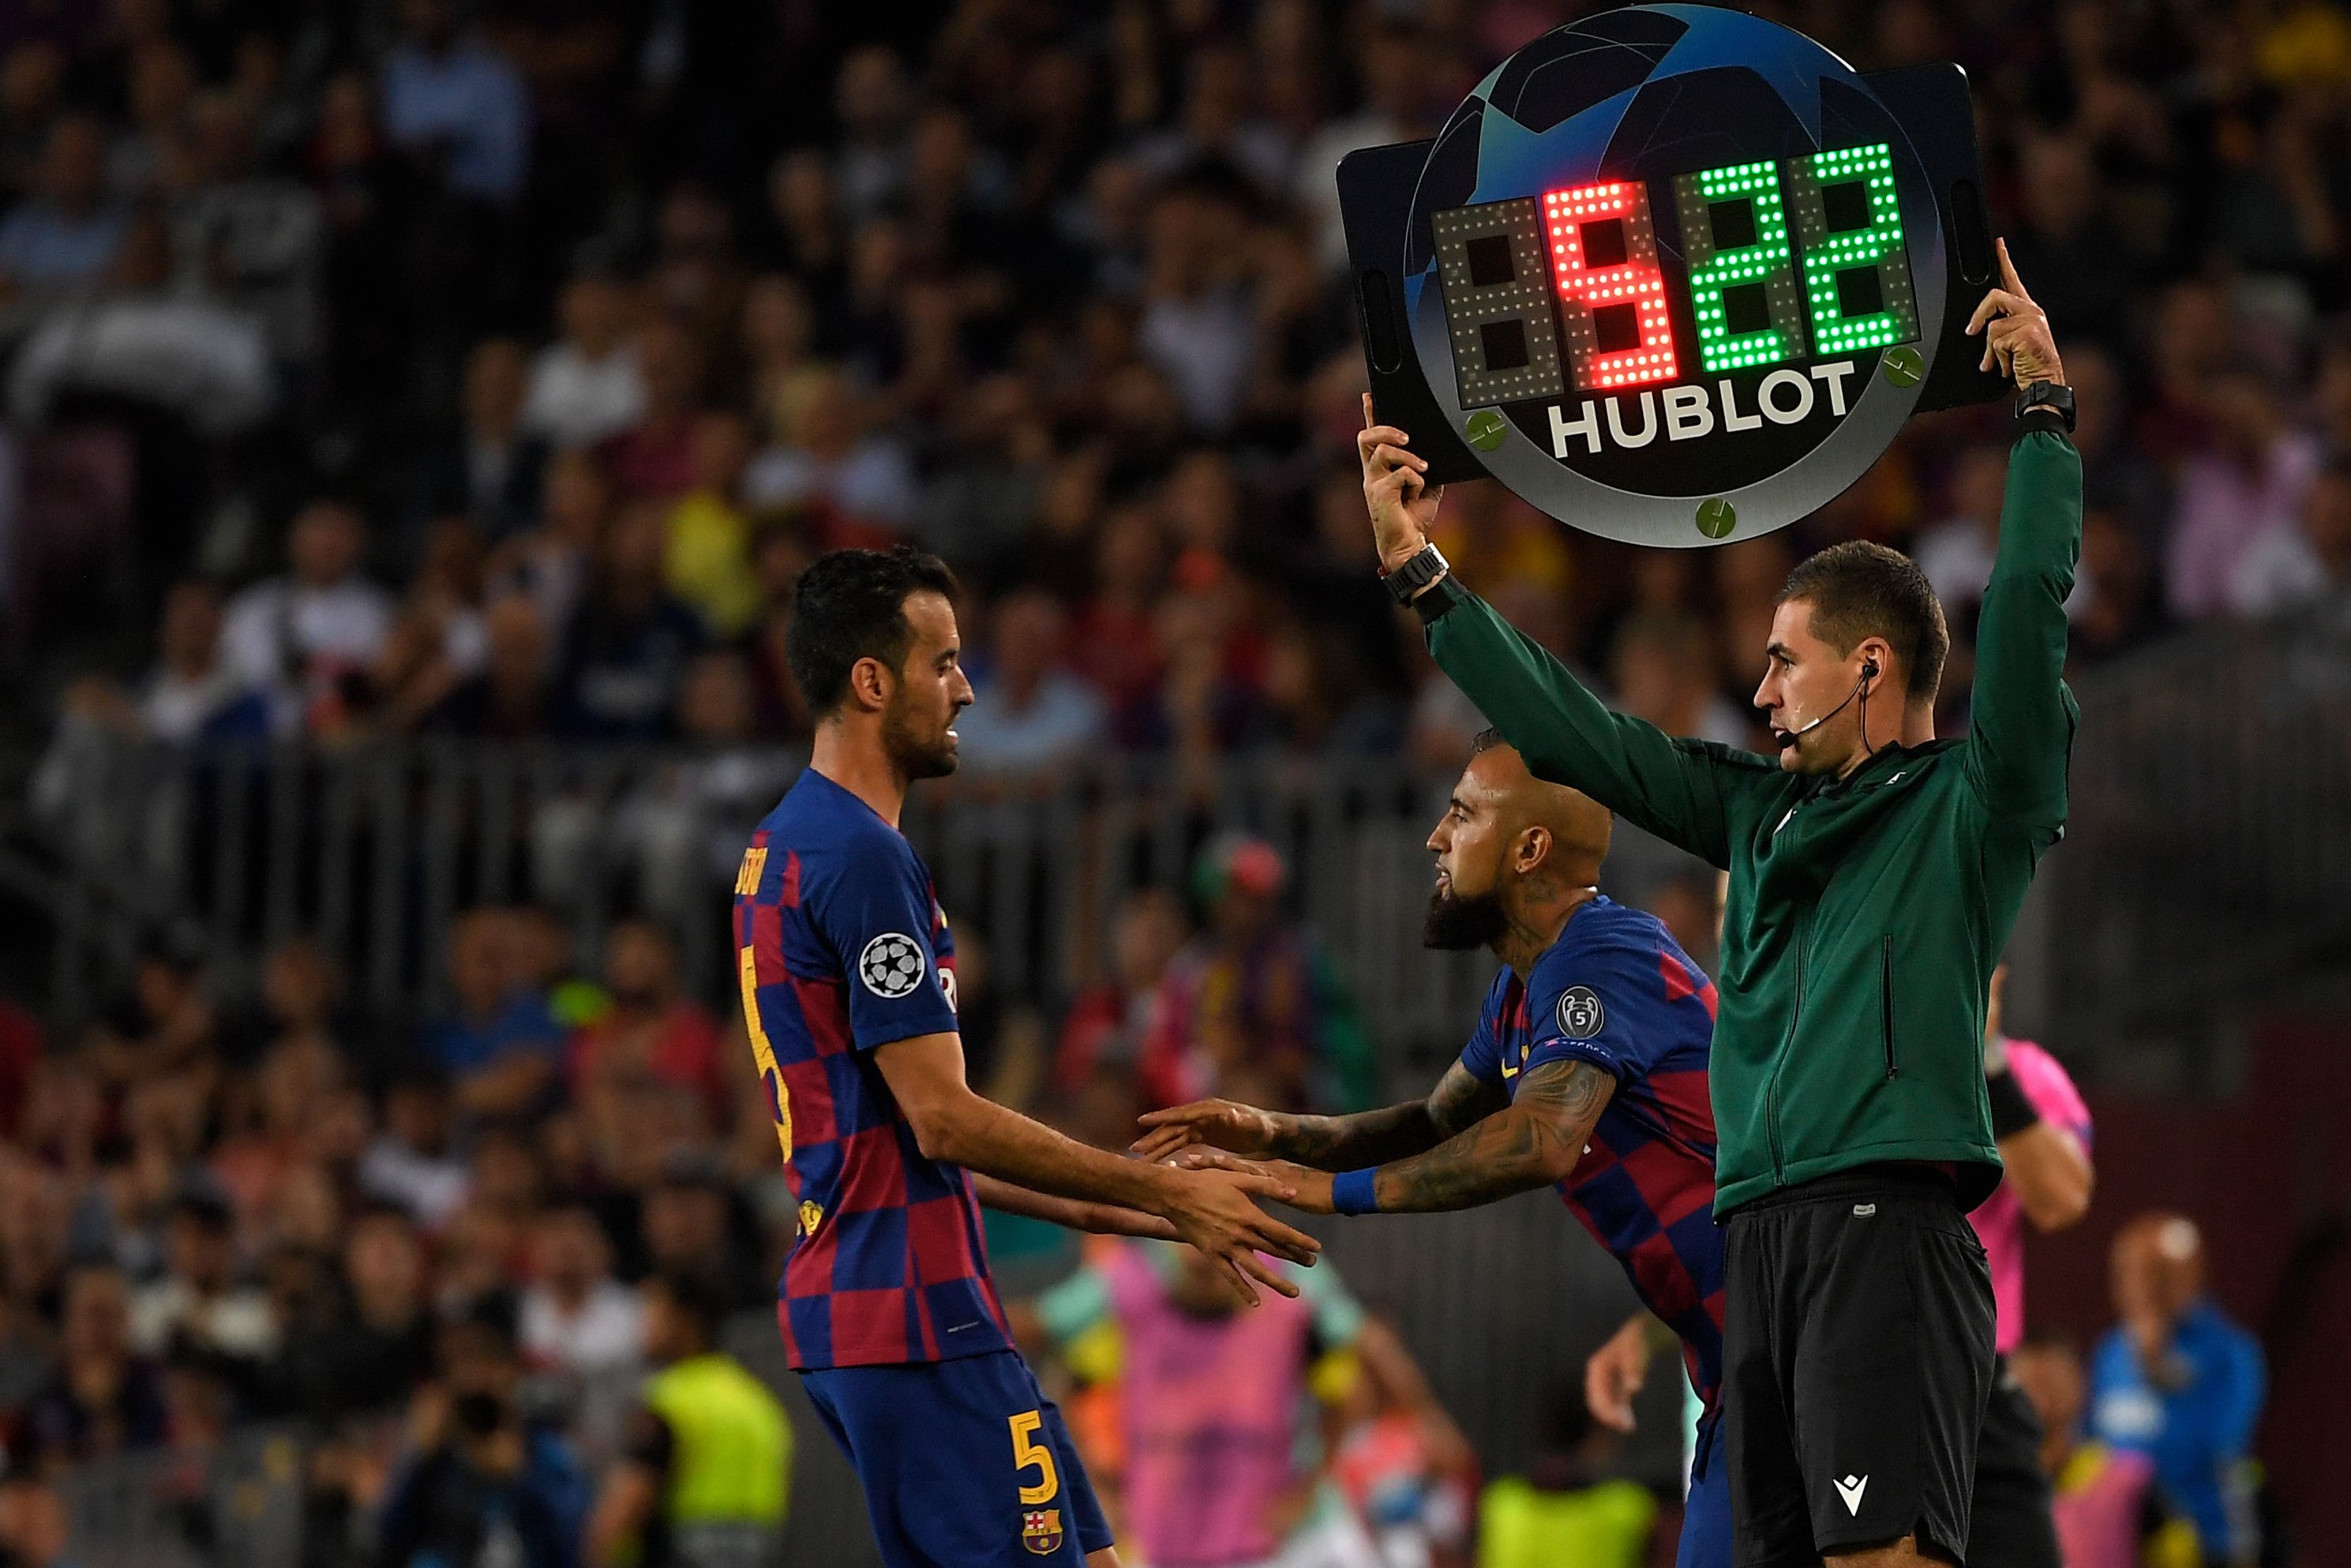 Sergio Busquets and Arturo Vidal are both expected to return after serving out their respective suspensions. (Photo by Lluis Gene/AFP via Getty Images)